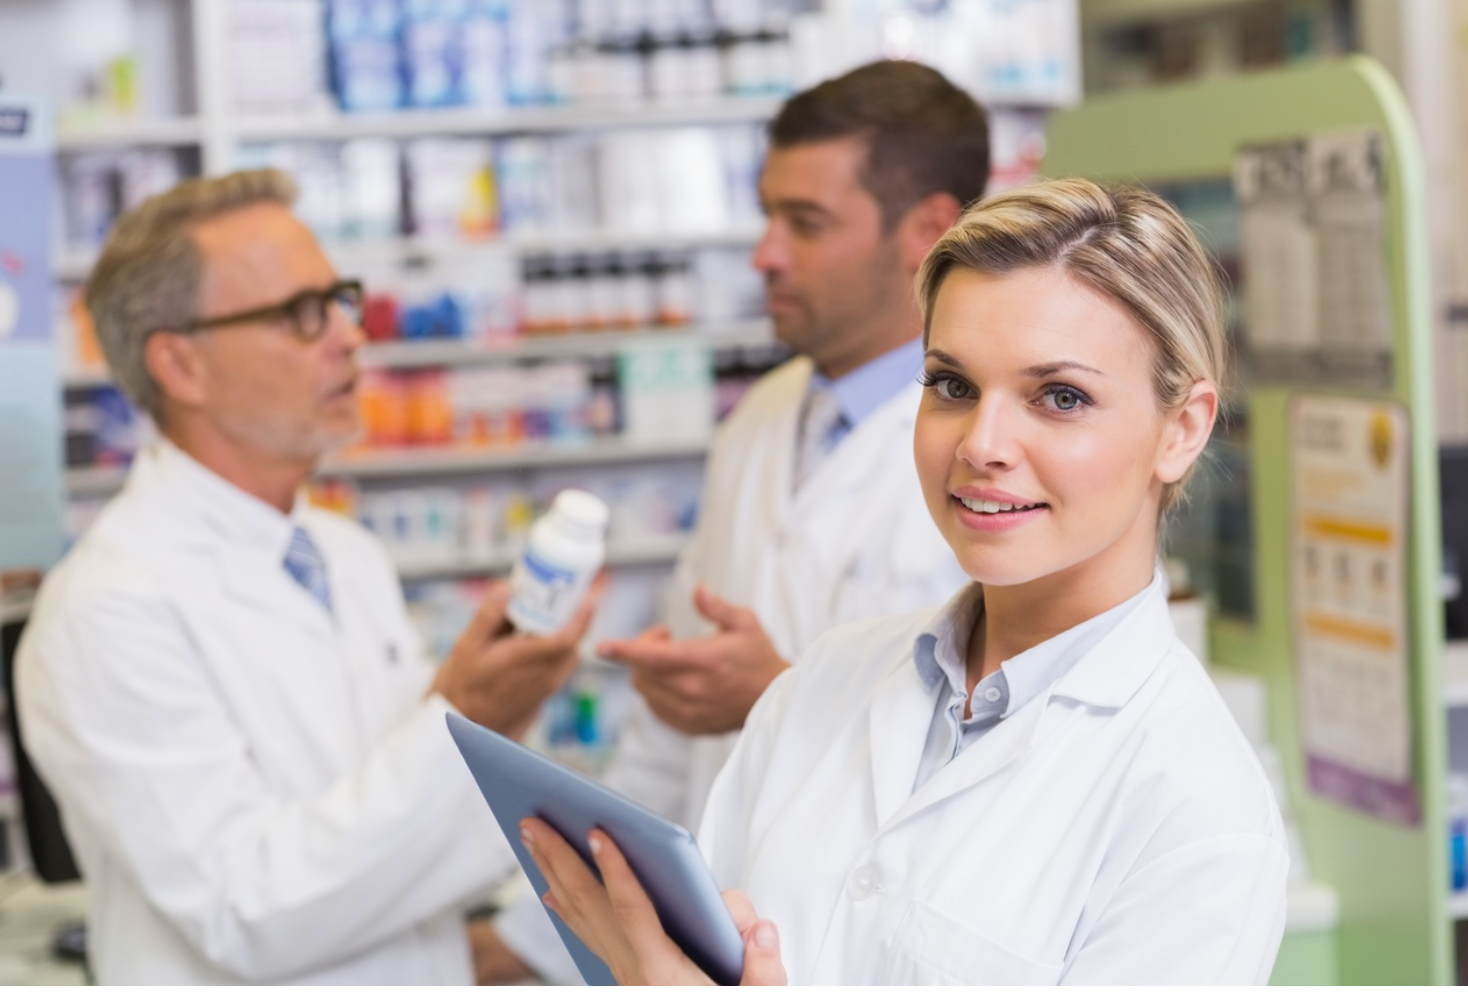 Recognizing the Value of Pharmacy Technicians